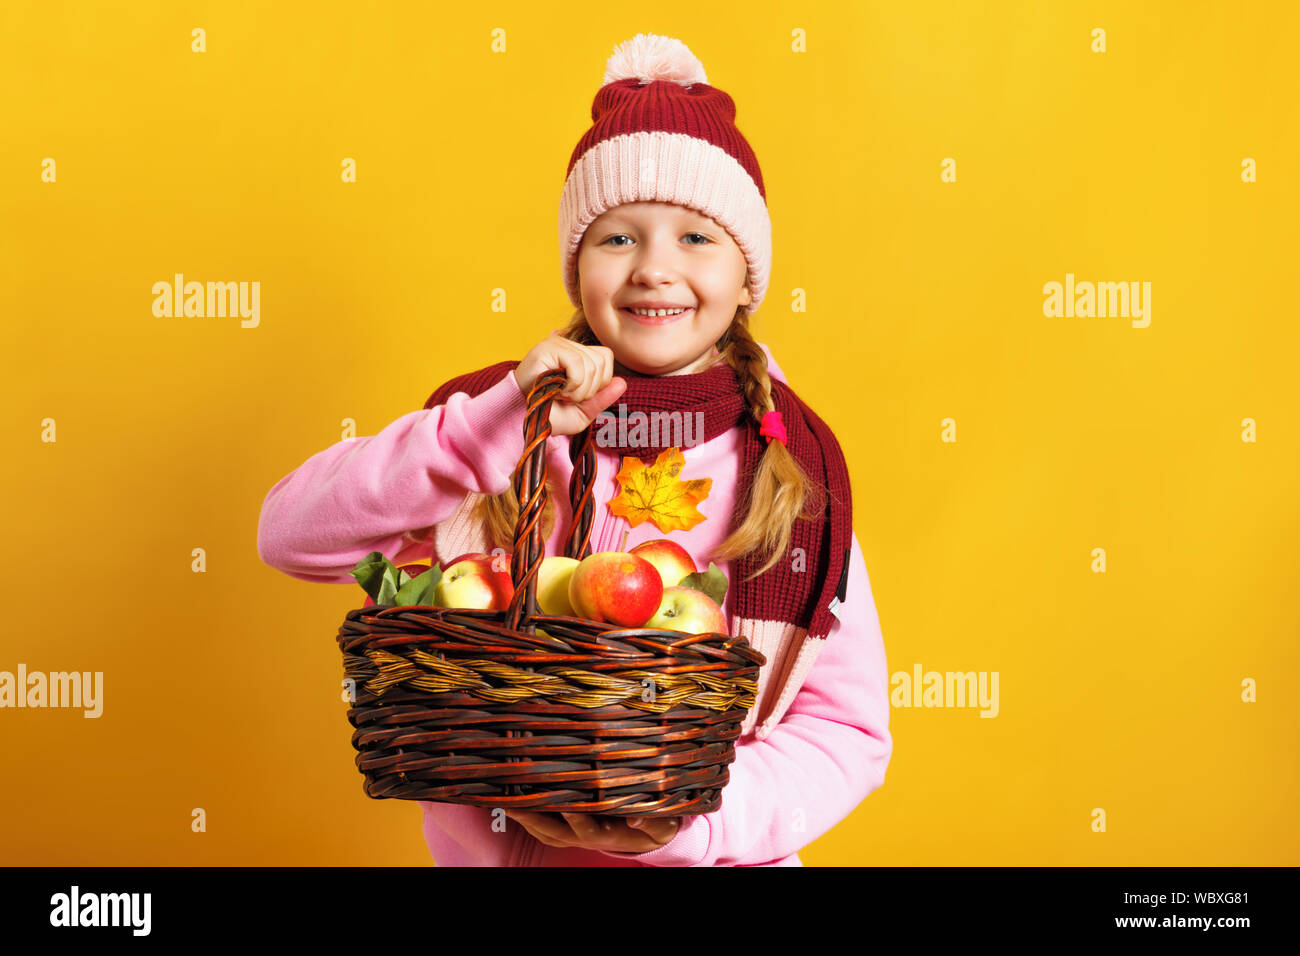 Cute little girl in a scarf and hat on a yellow background. A child holds a basket of apples. Harvest and autumn concept. Stock Photo